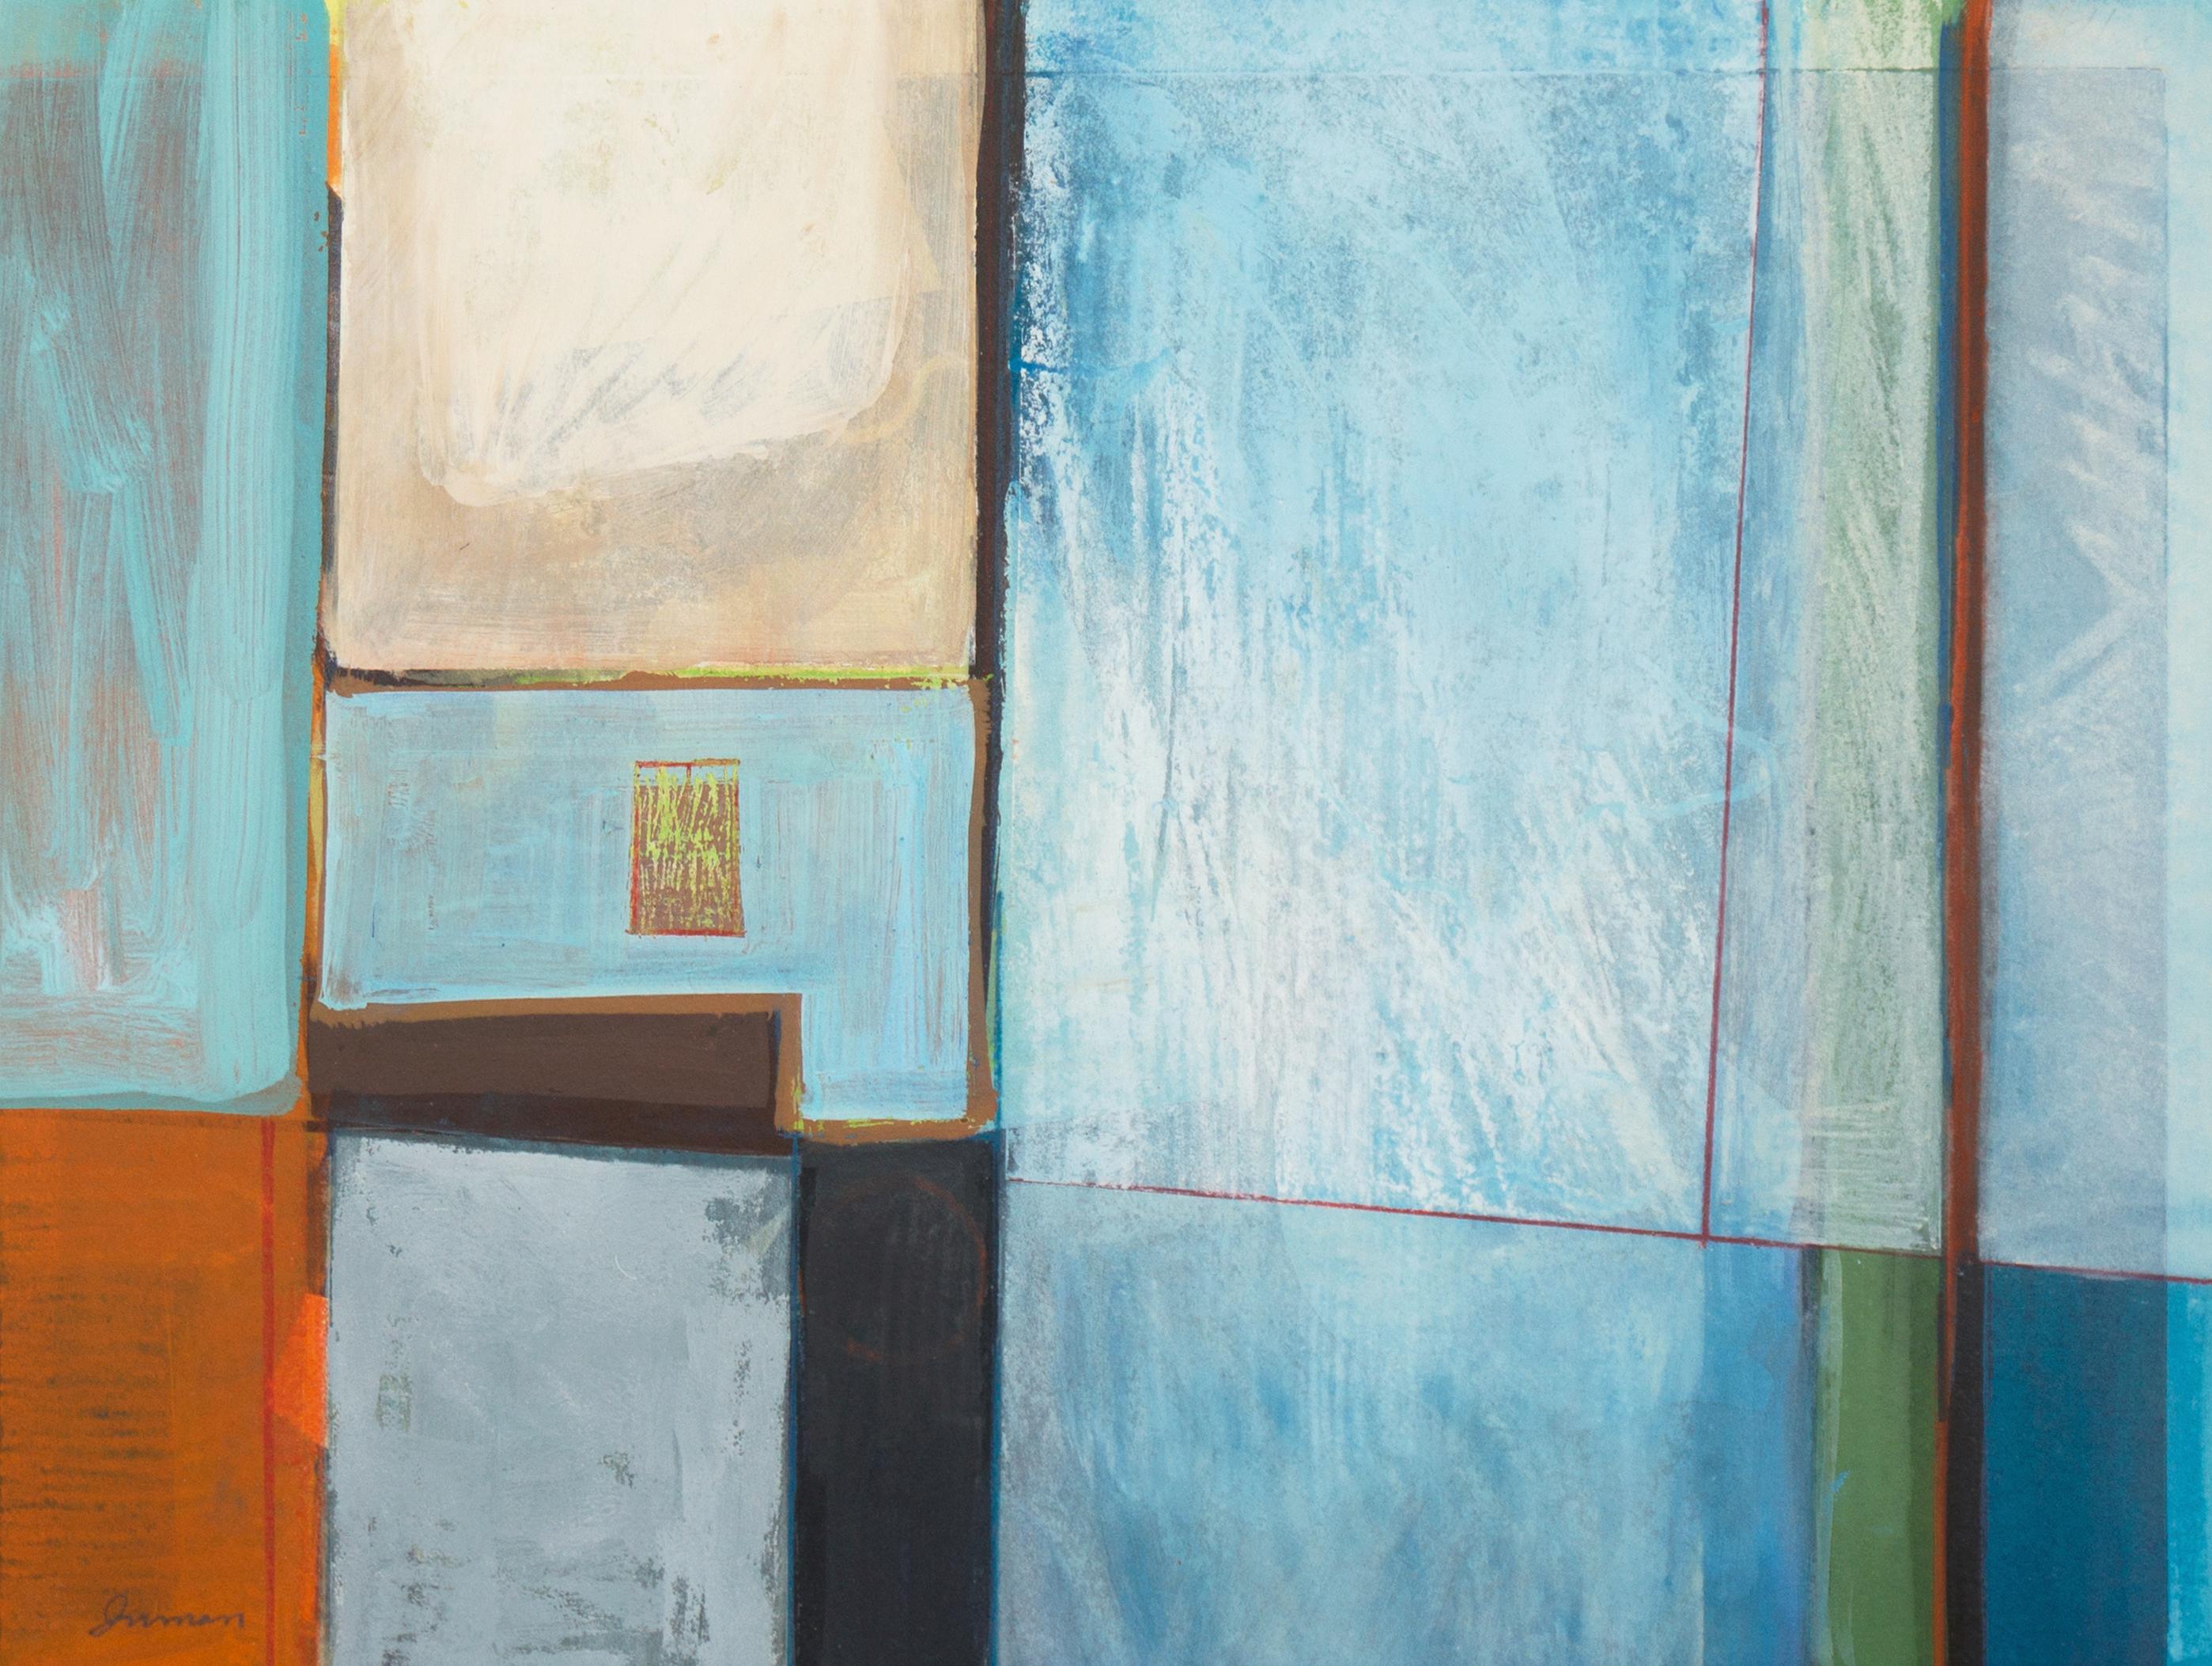 Robert Inman Abstract Painting - 'Abstract in Ivory and Blue', Chouinard, Osaka, Butler Institute of Art, LACMA